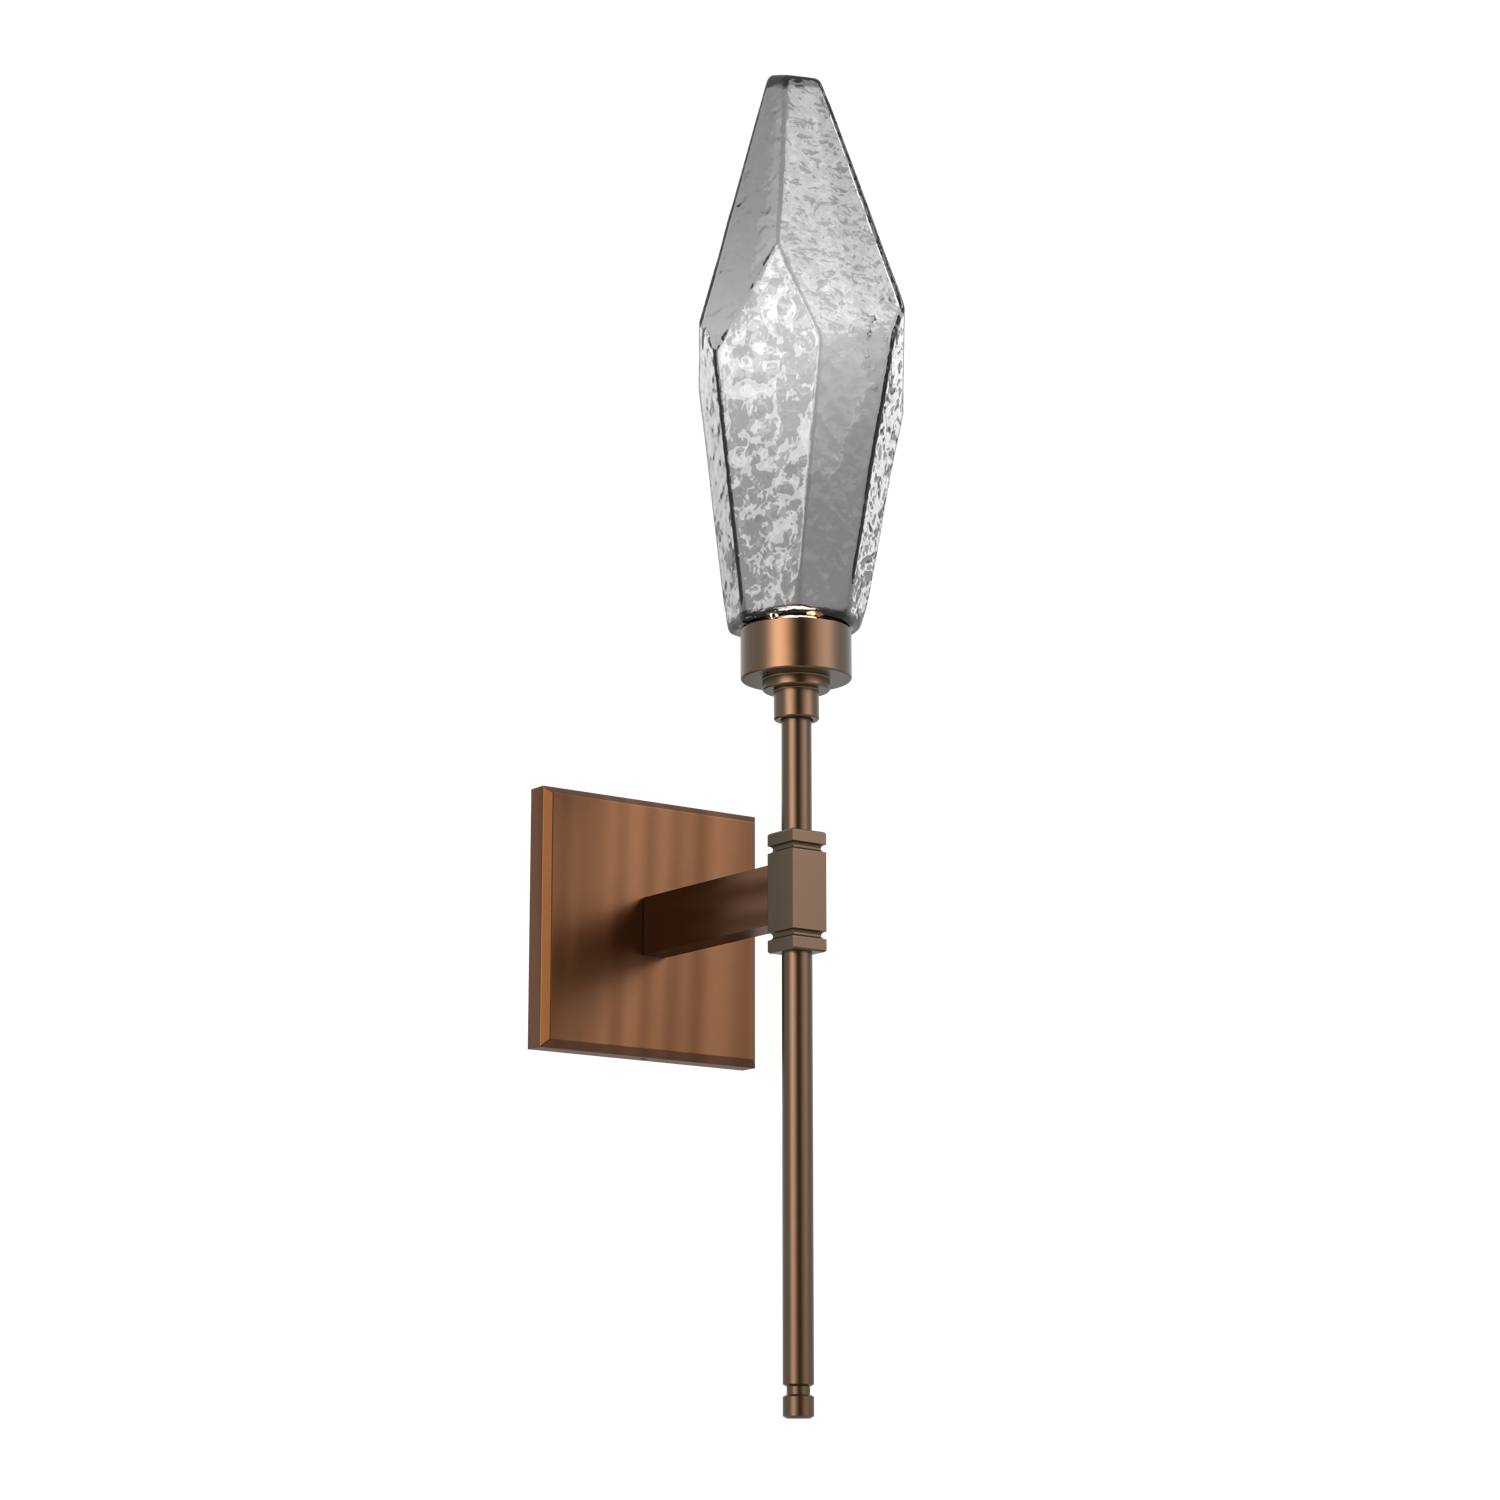 IDB0050-07-RB-CS-Hammerton-Studio-Rock-Crystal-belvedere-wall-sconce-with-oil-rubbed-bronze-finish-and-chilled-smoke-glass-shades-and-LED-lamping